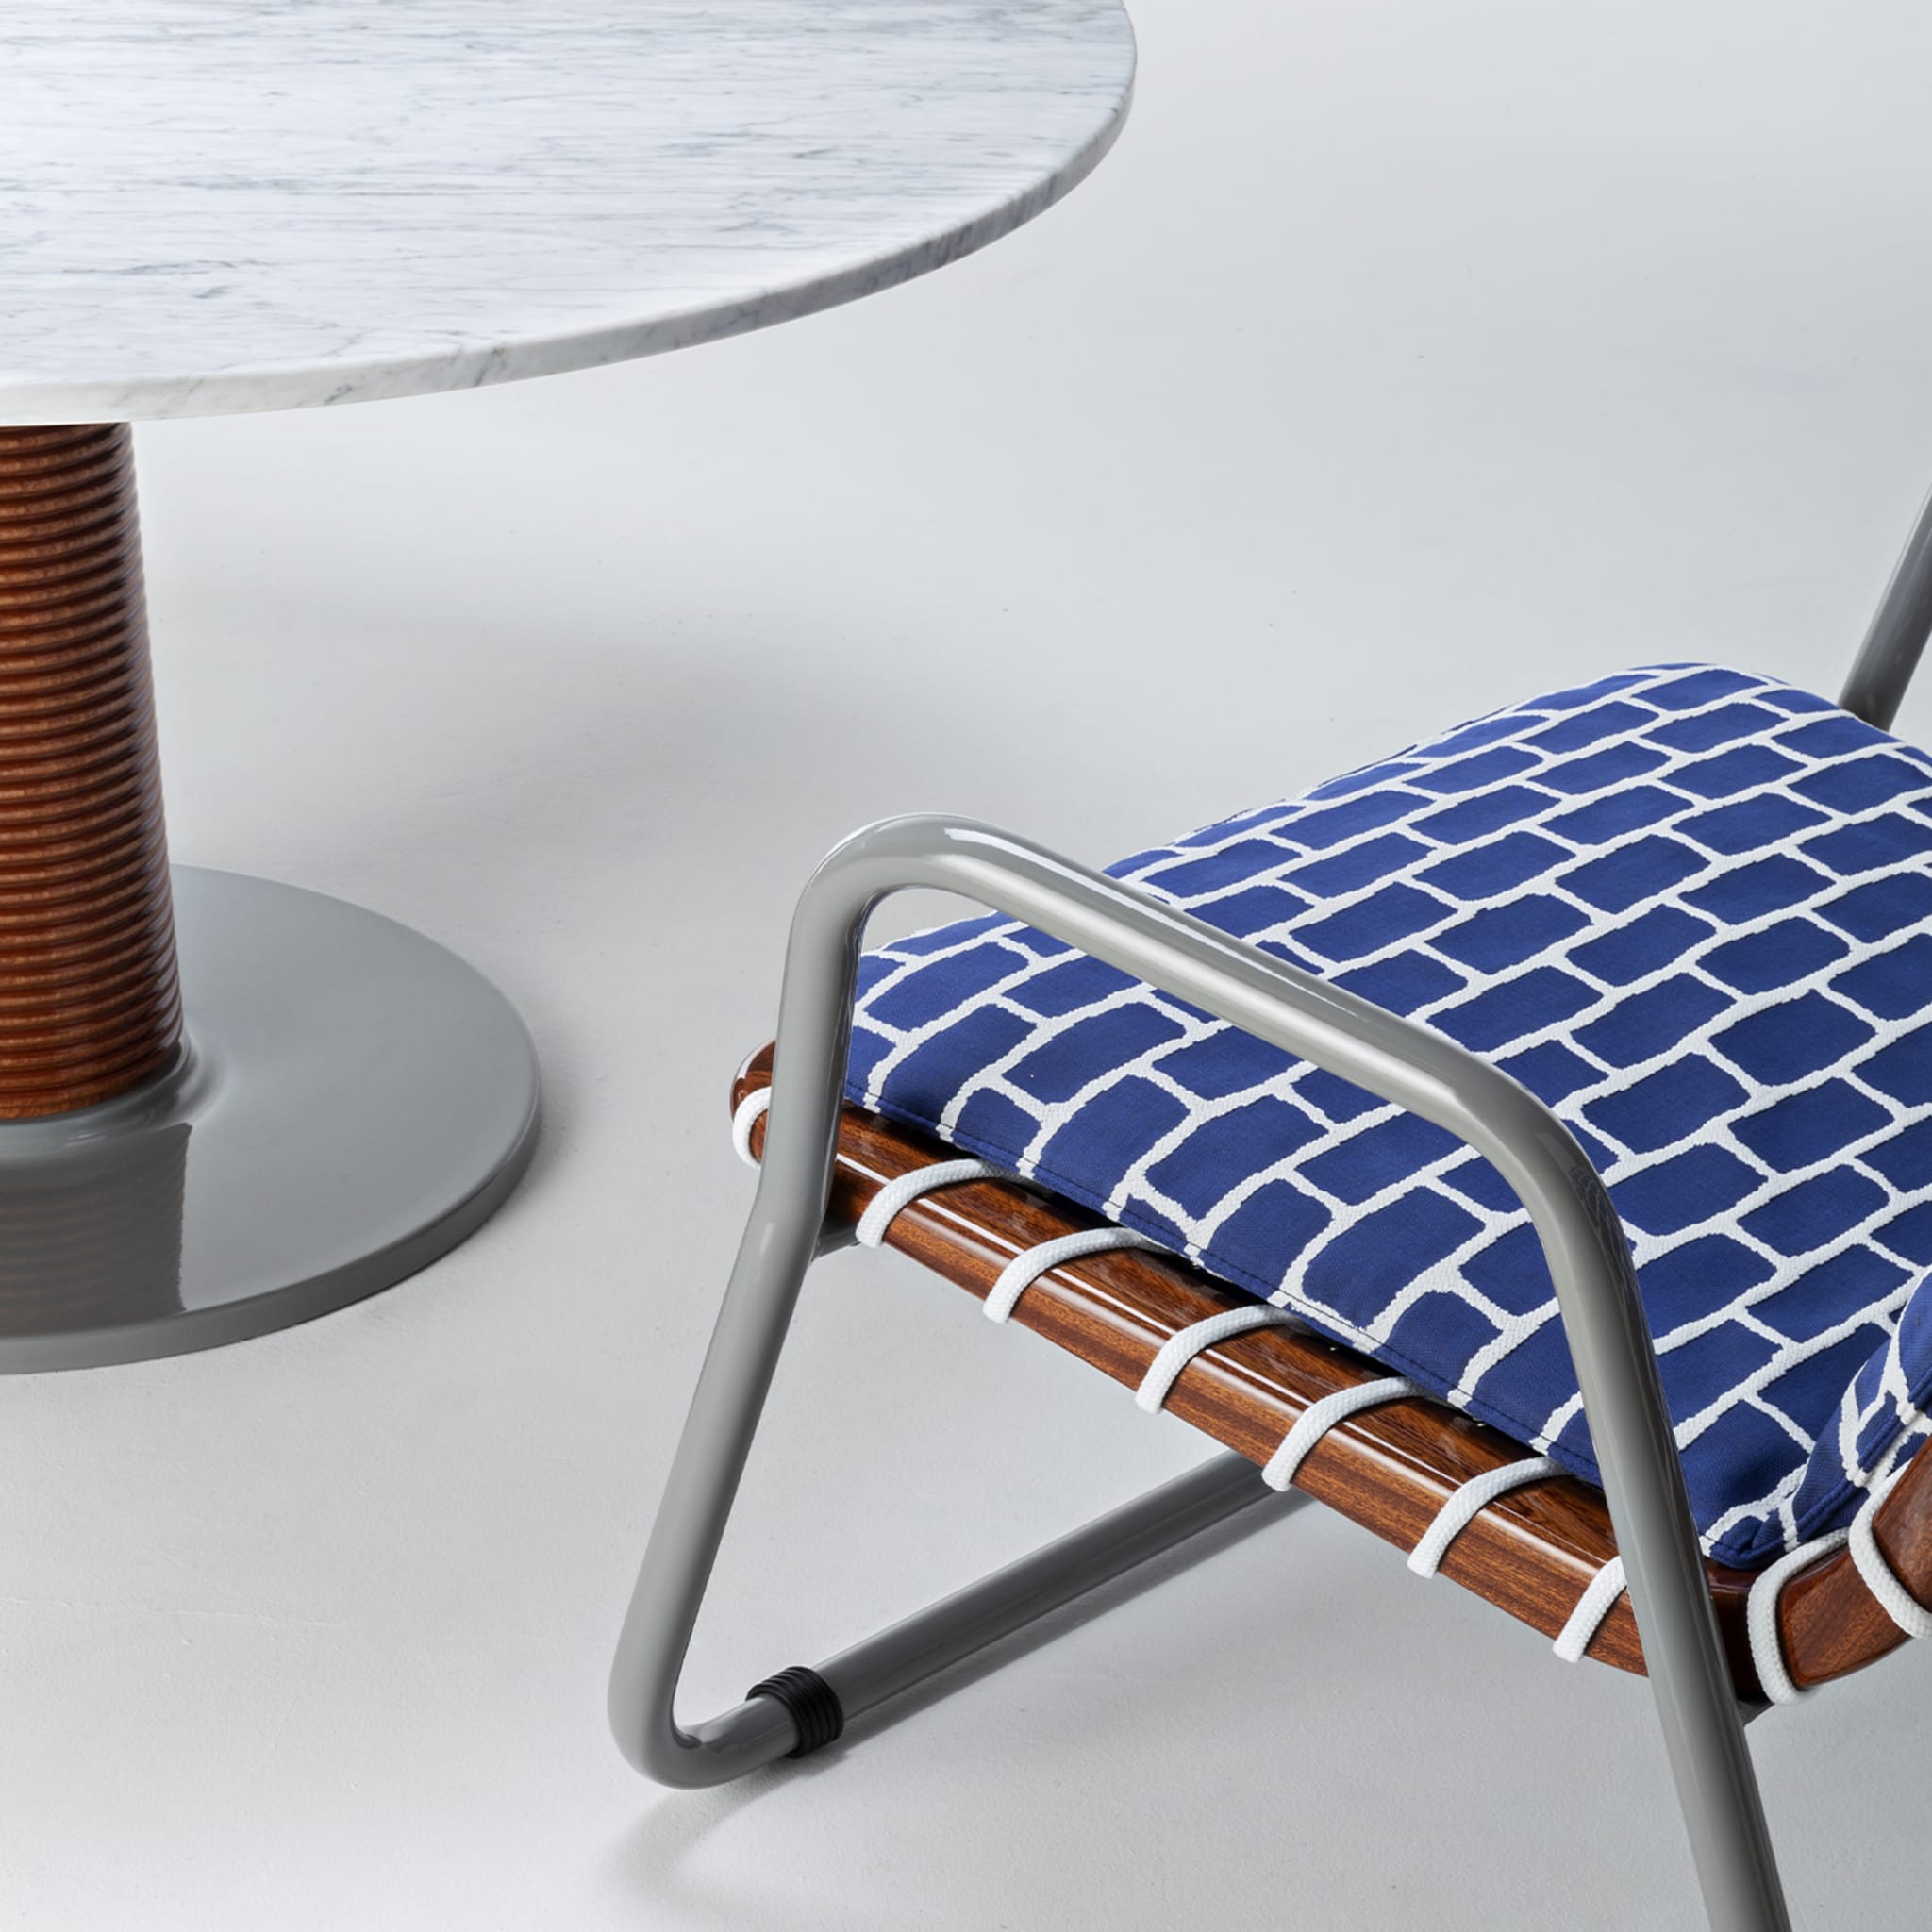 Sunset Lounge Lucido Mediterraneo Mahogany Dining Table + Carrara by Paola Navone - Alternative view 1